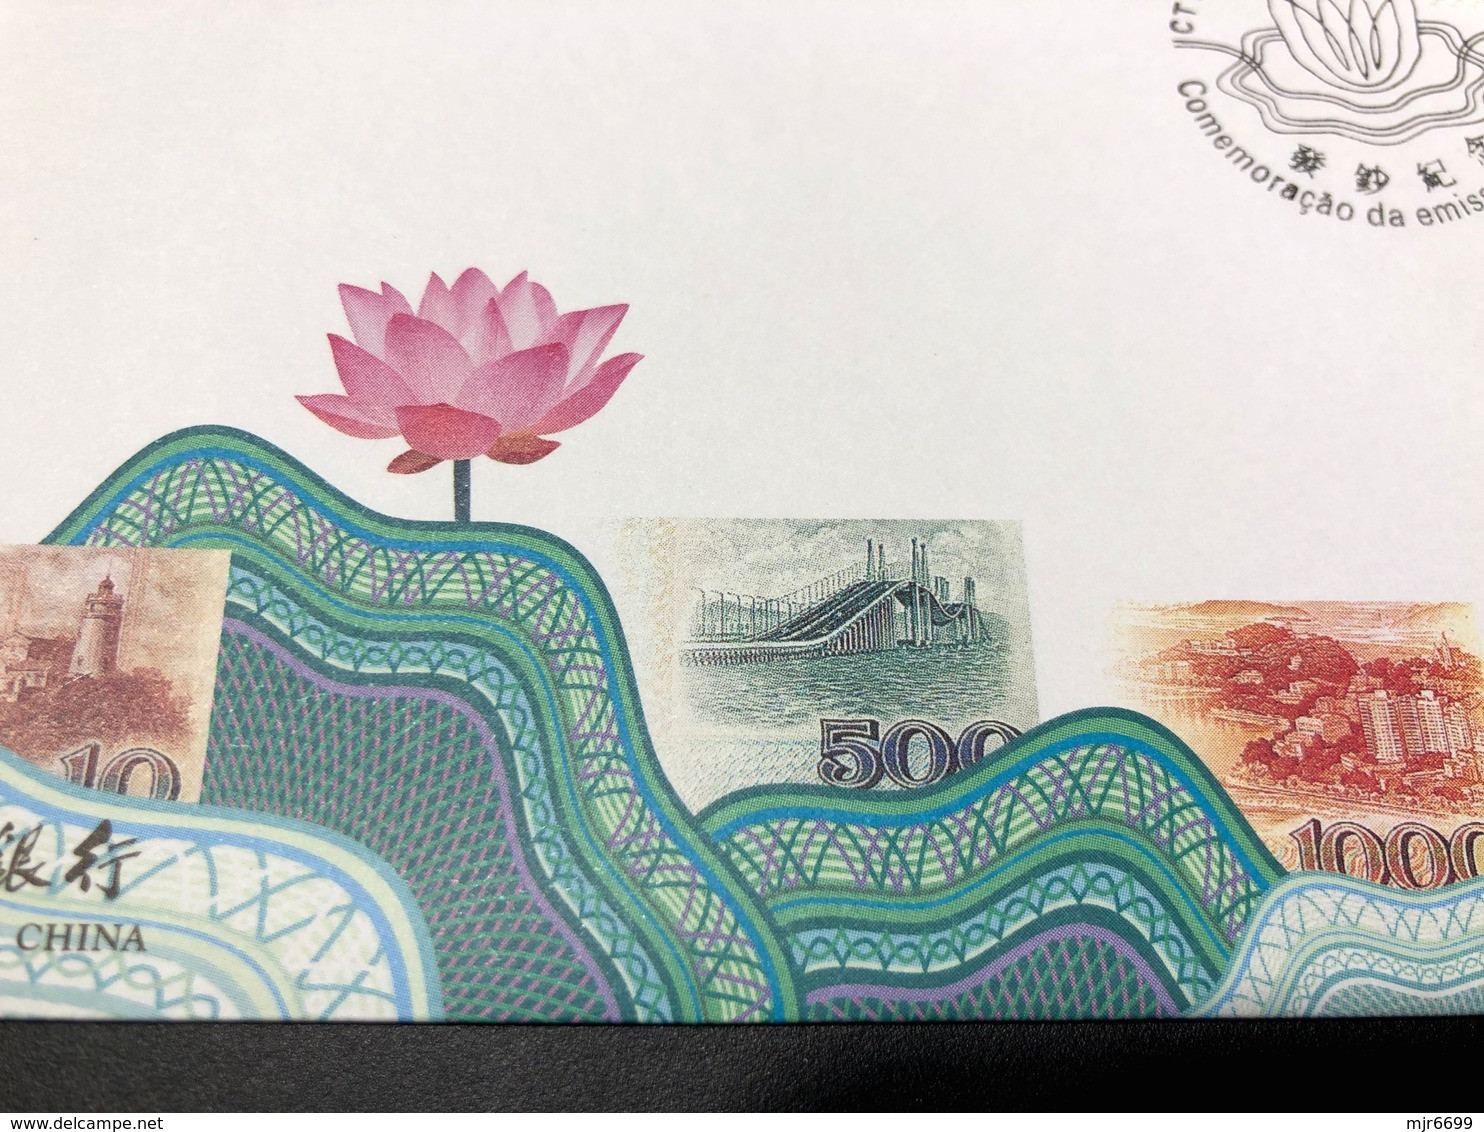 MACAU 1995 BANK OF CHINA BANK NOTE ISSUE COMMEMORATIVE COVER WITH COMMEMORATIVE CANCELLATION. - FDC